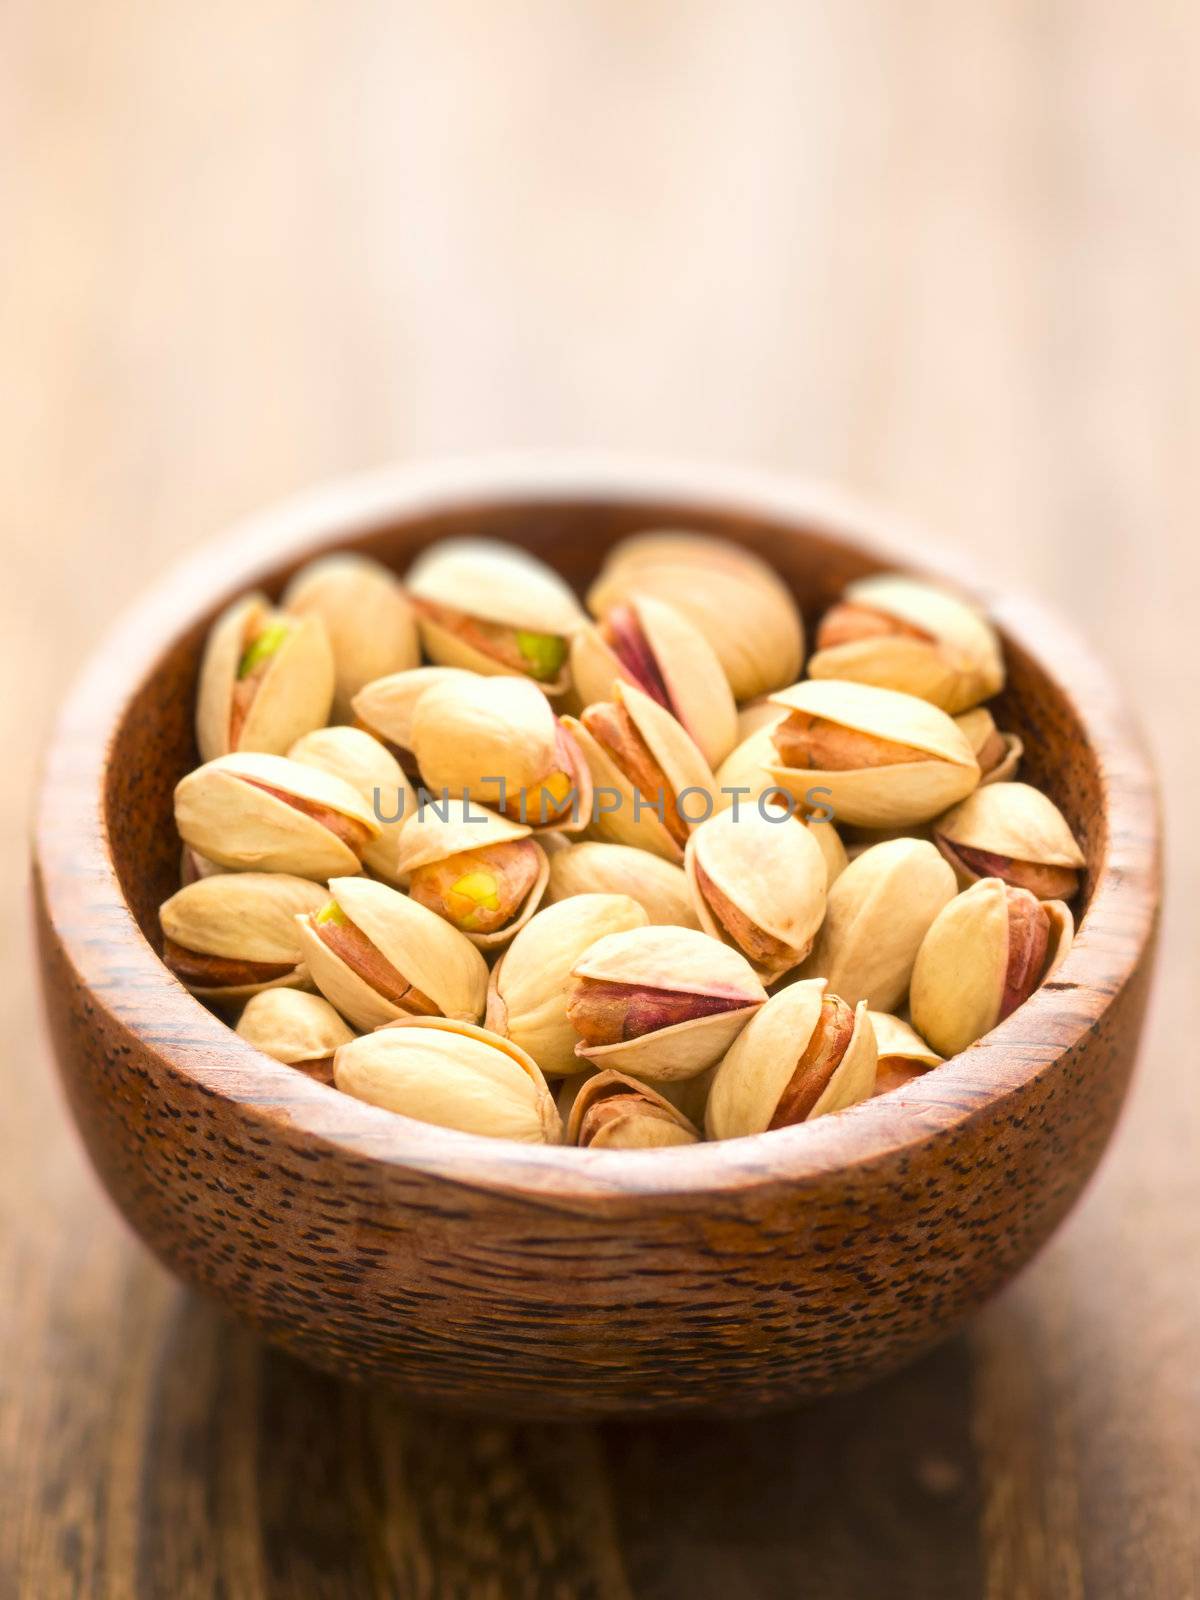 close up of a bowl of pistachio nuts